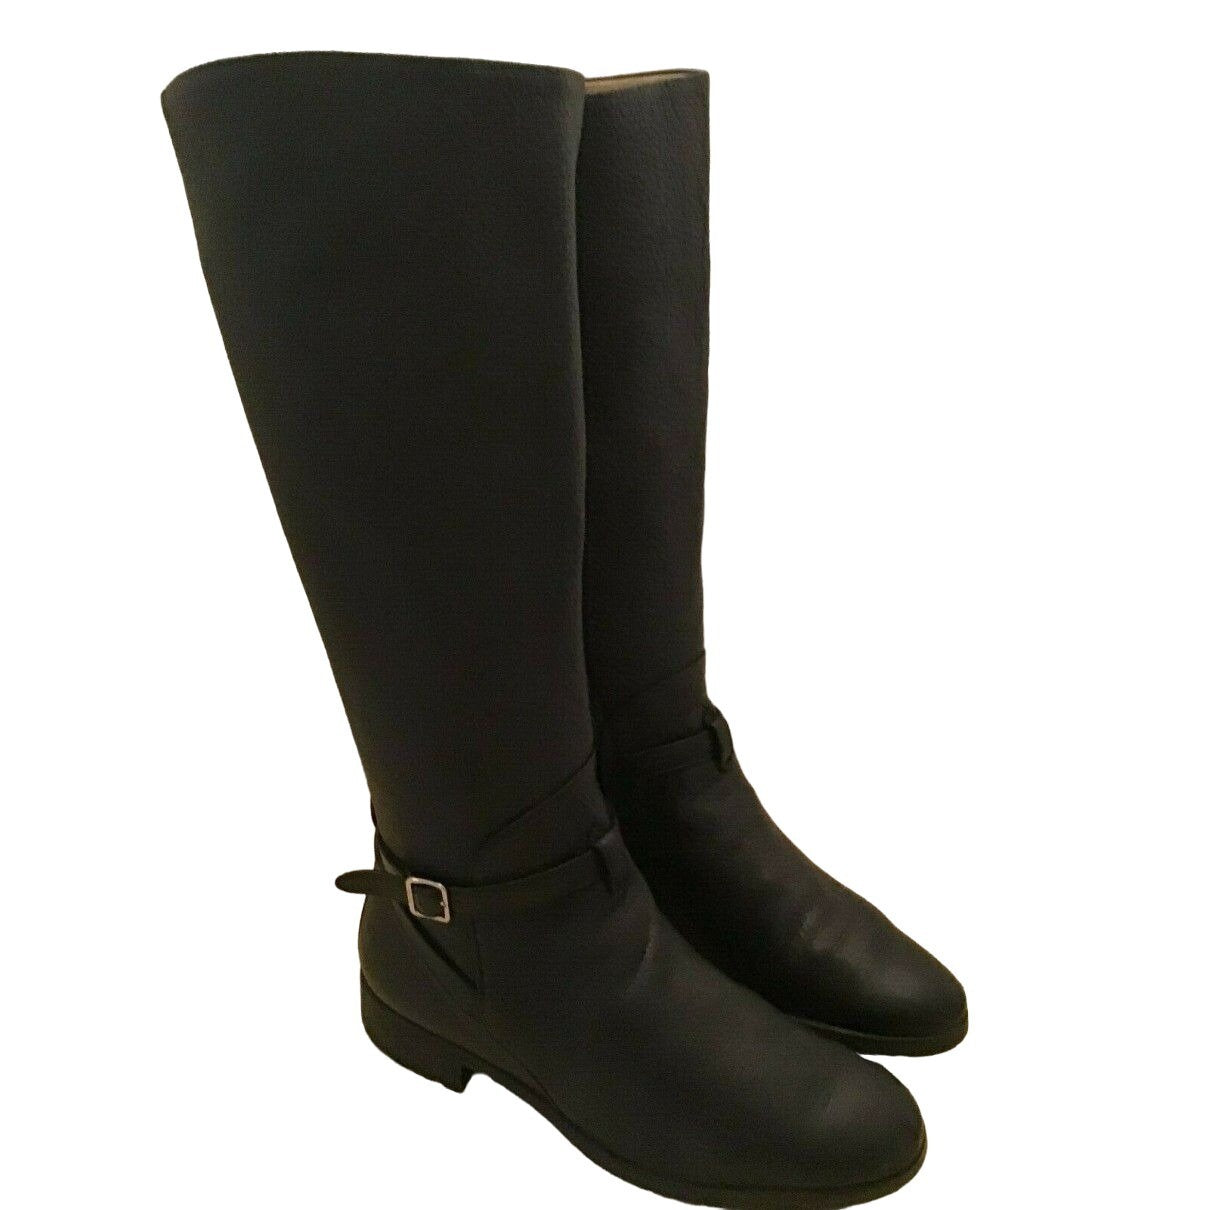 Bally Switzerland, size 9.5, black leather riding boots with chrome hardware, side zippers, almond toes and 1.5" block heels